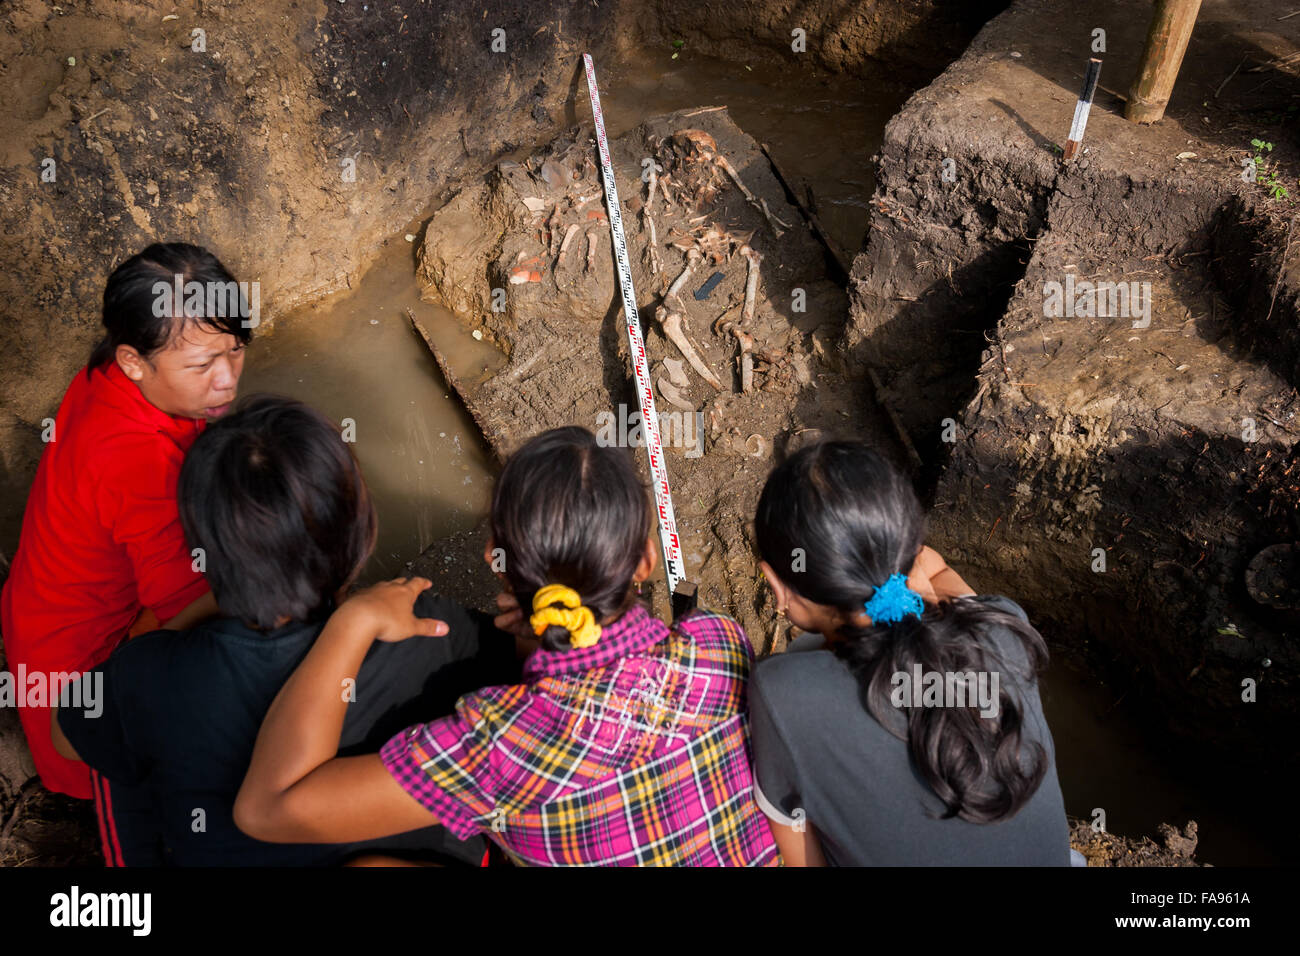 Villagers discuss at the excavation site of prehistoric burial site conducted by the Indonesia's National Archaeology Research in Karawang. Stock Photo